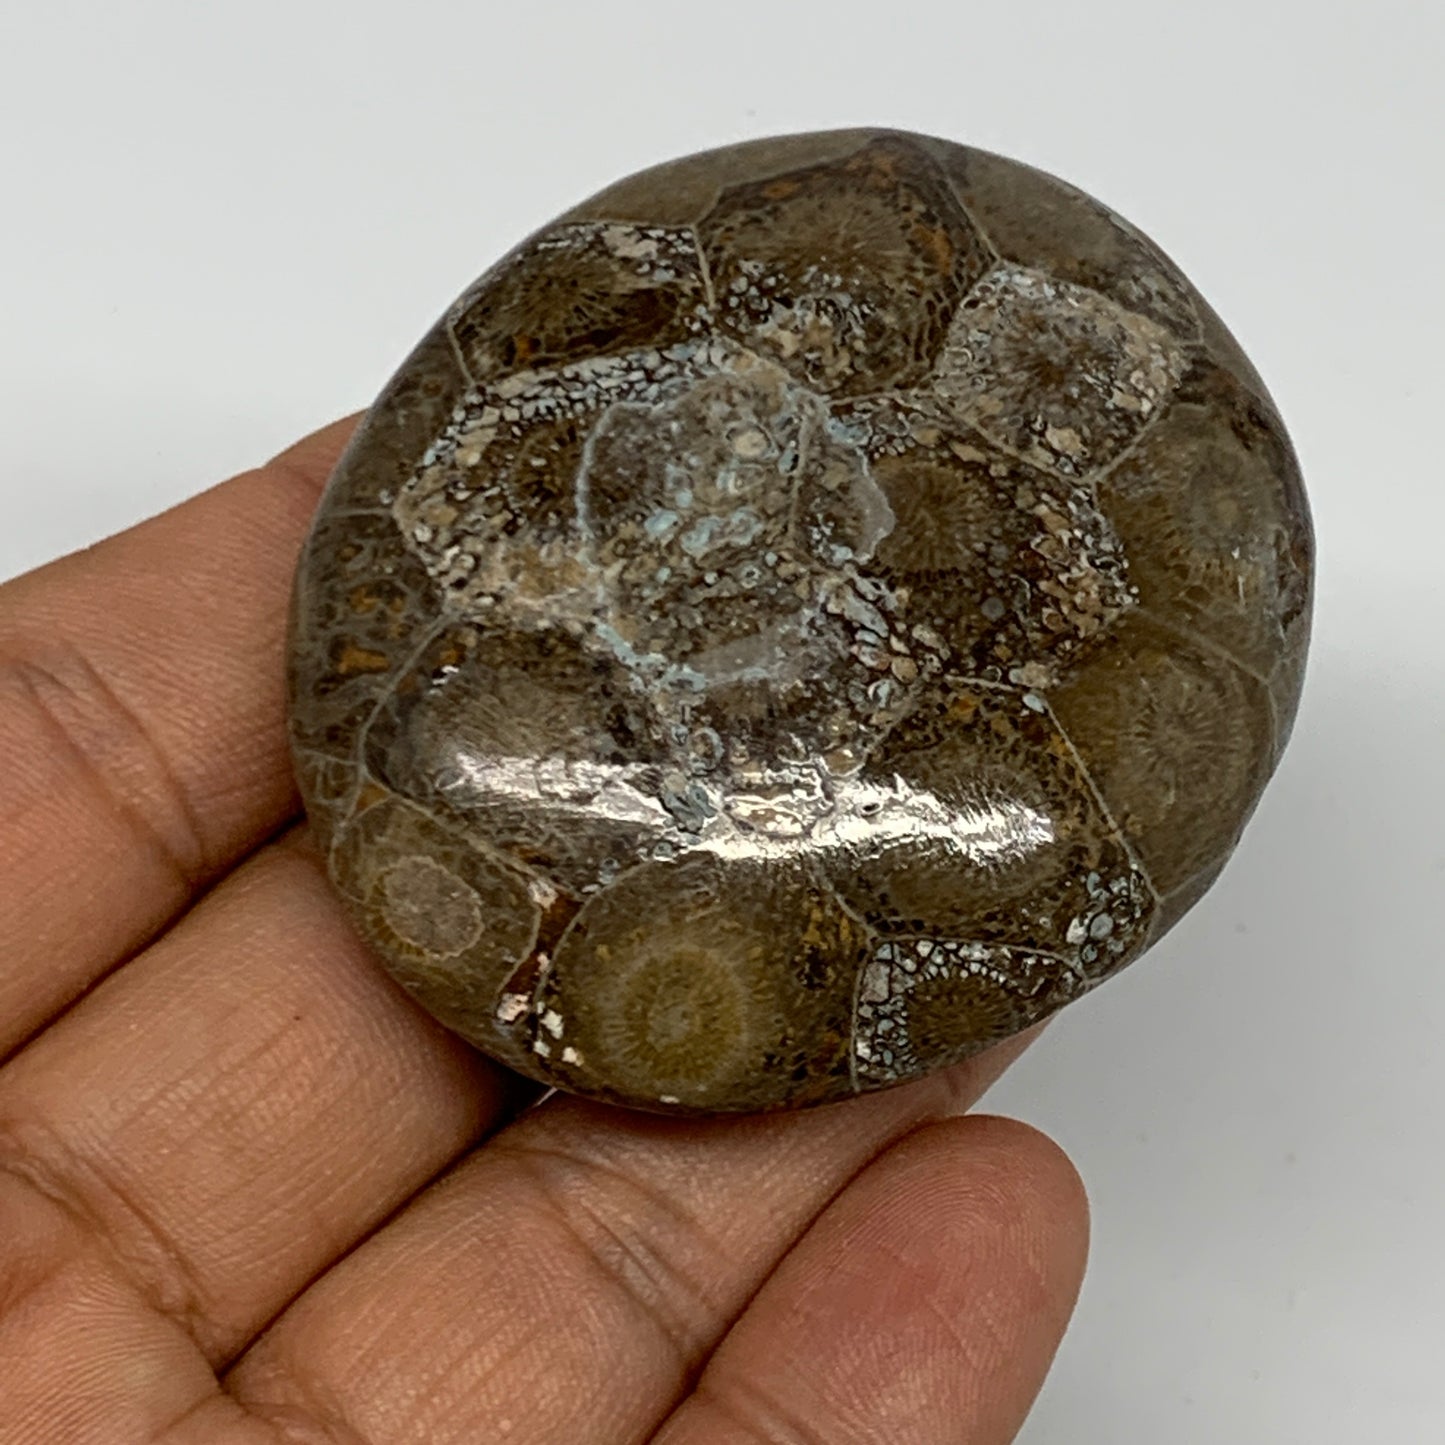 54.8g,2.3"x1.9"x 0.7", Coral Fossils Palm-Stone Polished from Morocco, B20340